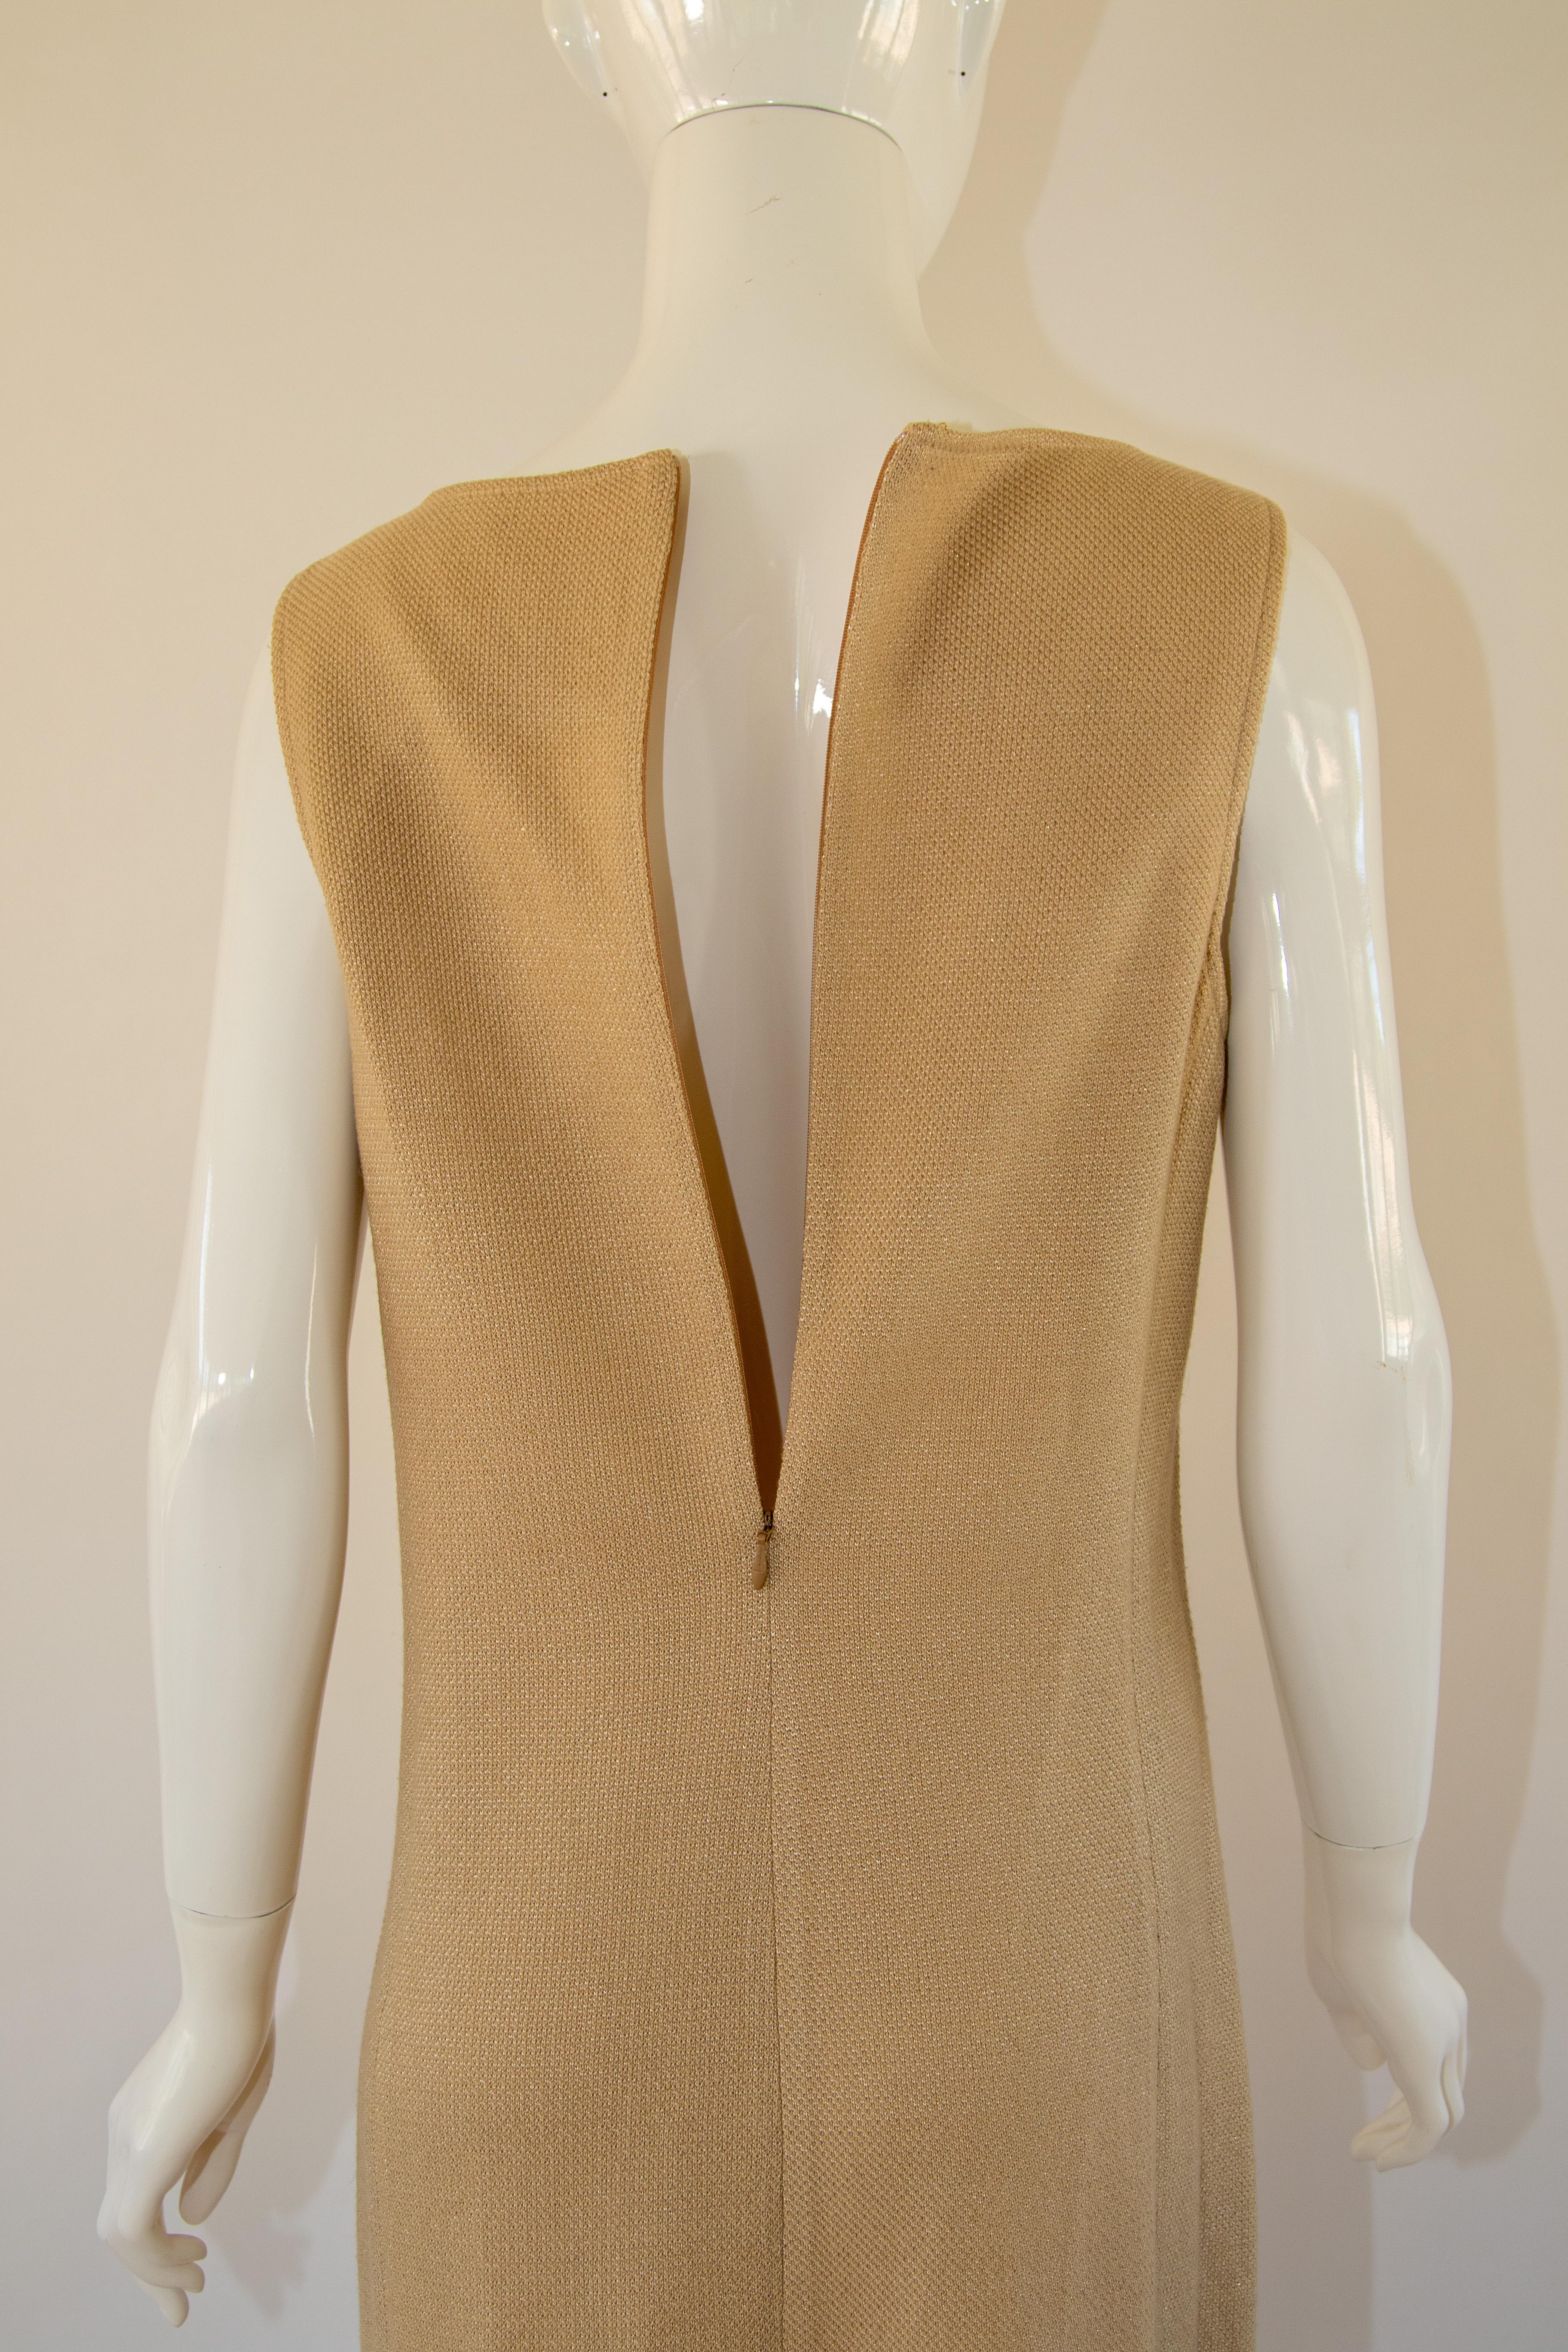 Vintage St John Collection By Marie Gray Beige Knit Wool Mini Dress For Sale 7